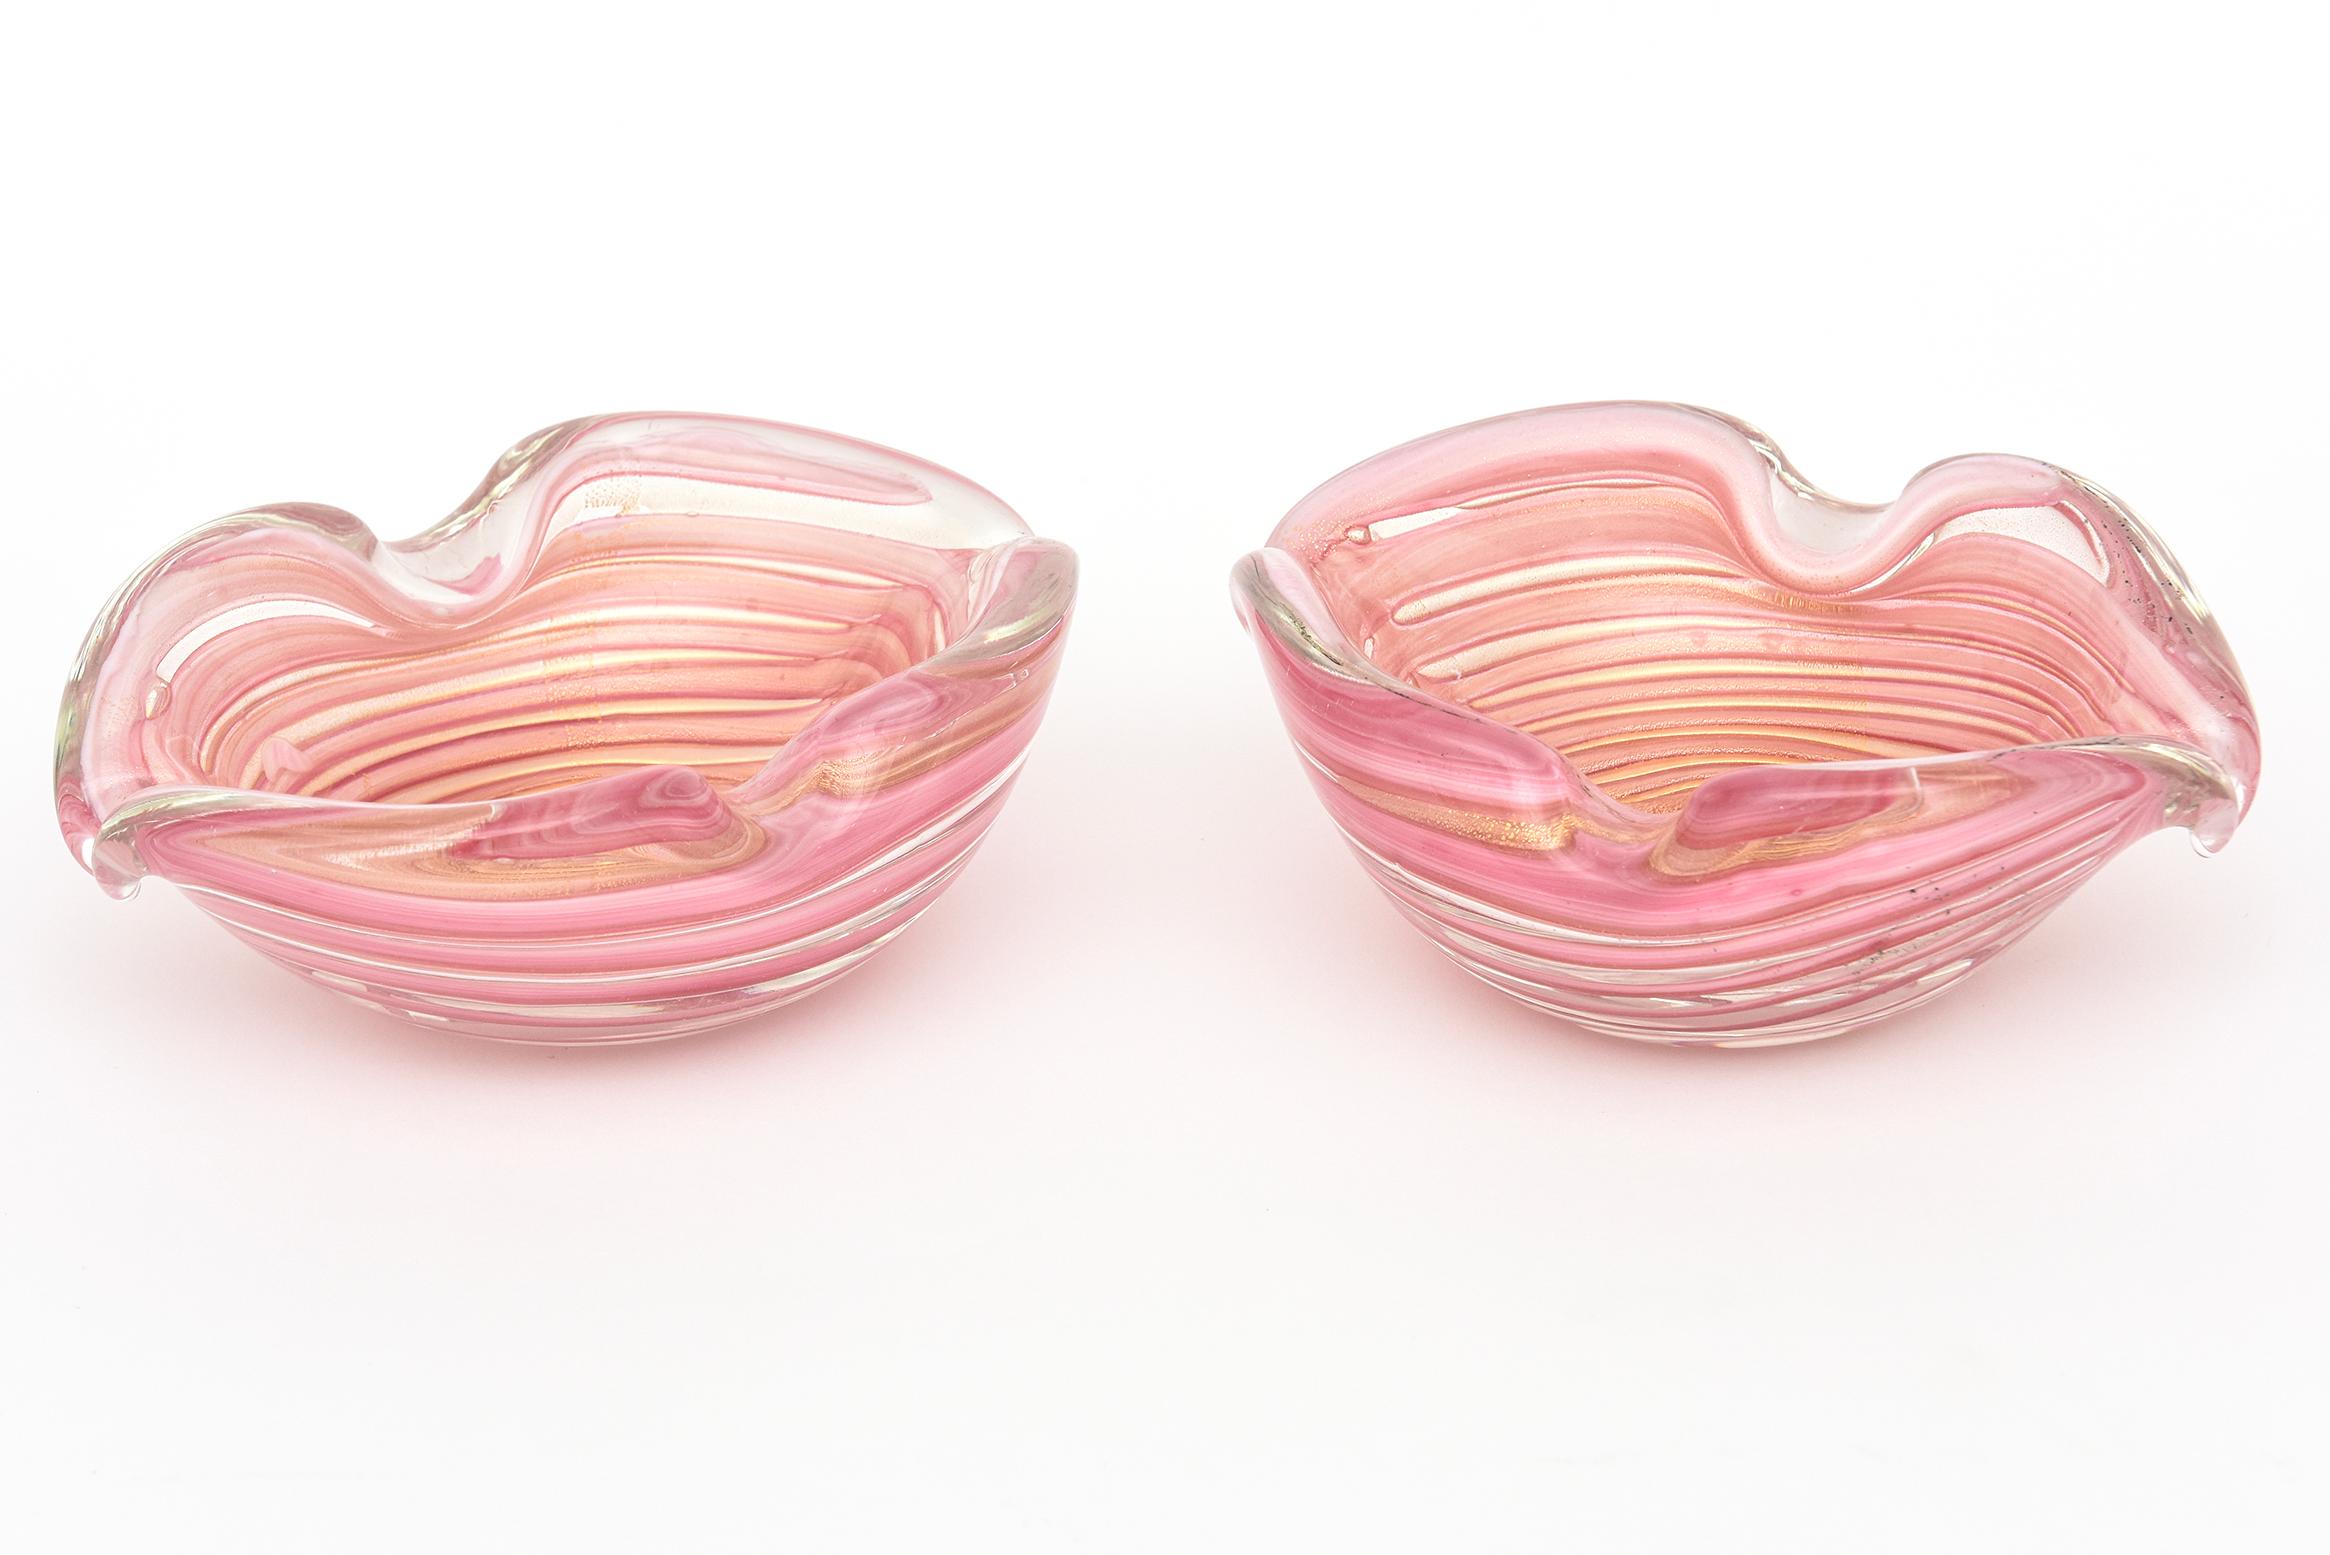 This vintage pair of rare gorgeous Murano glass bowls were designed by Ercole Barovier for the Barovier e Toso Glass Co. There are rows and layers of pink stripes graduated in sizes and thickness with abundant heavy gold packed flecks and gold leaf